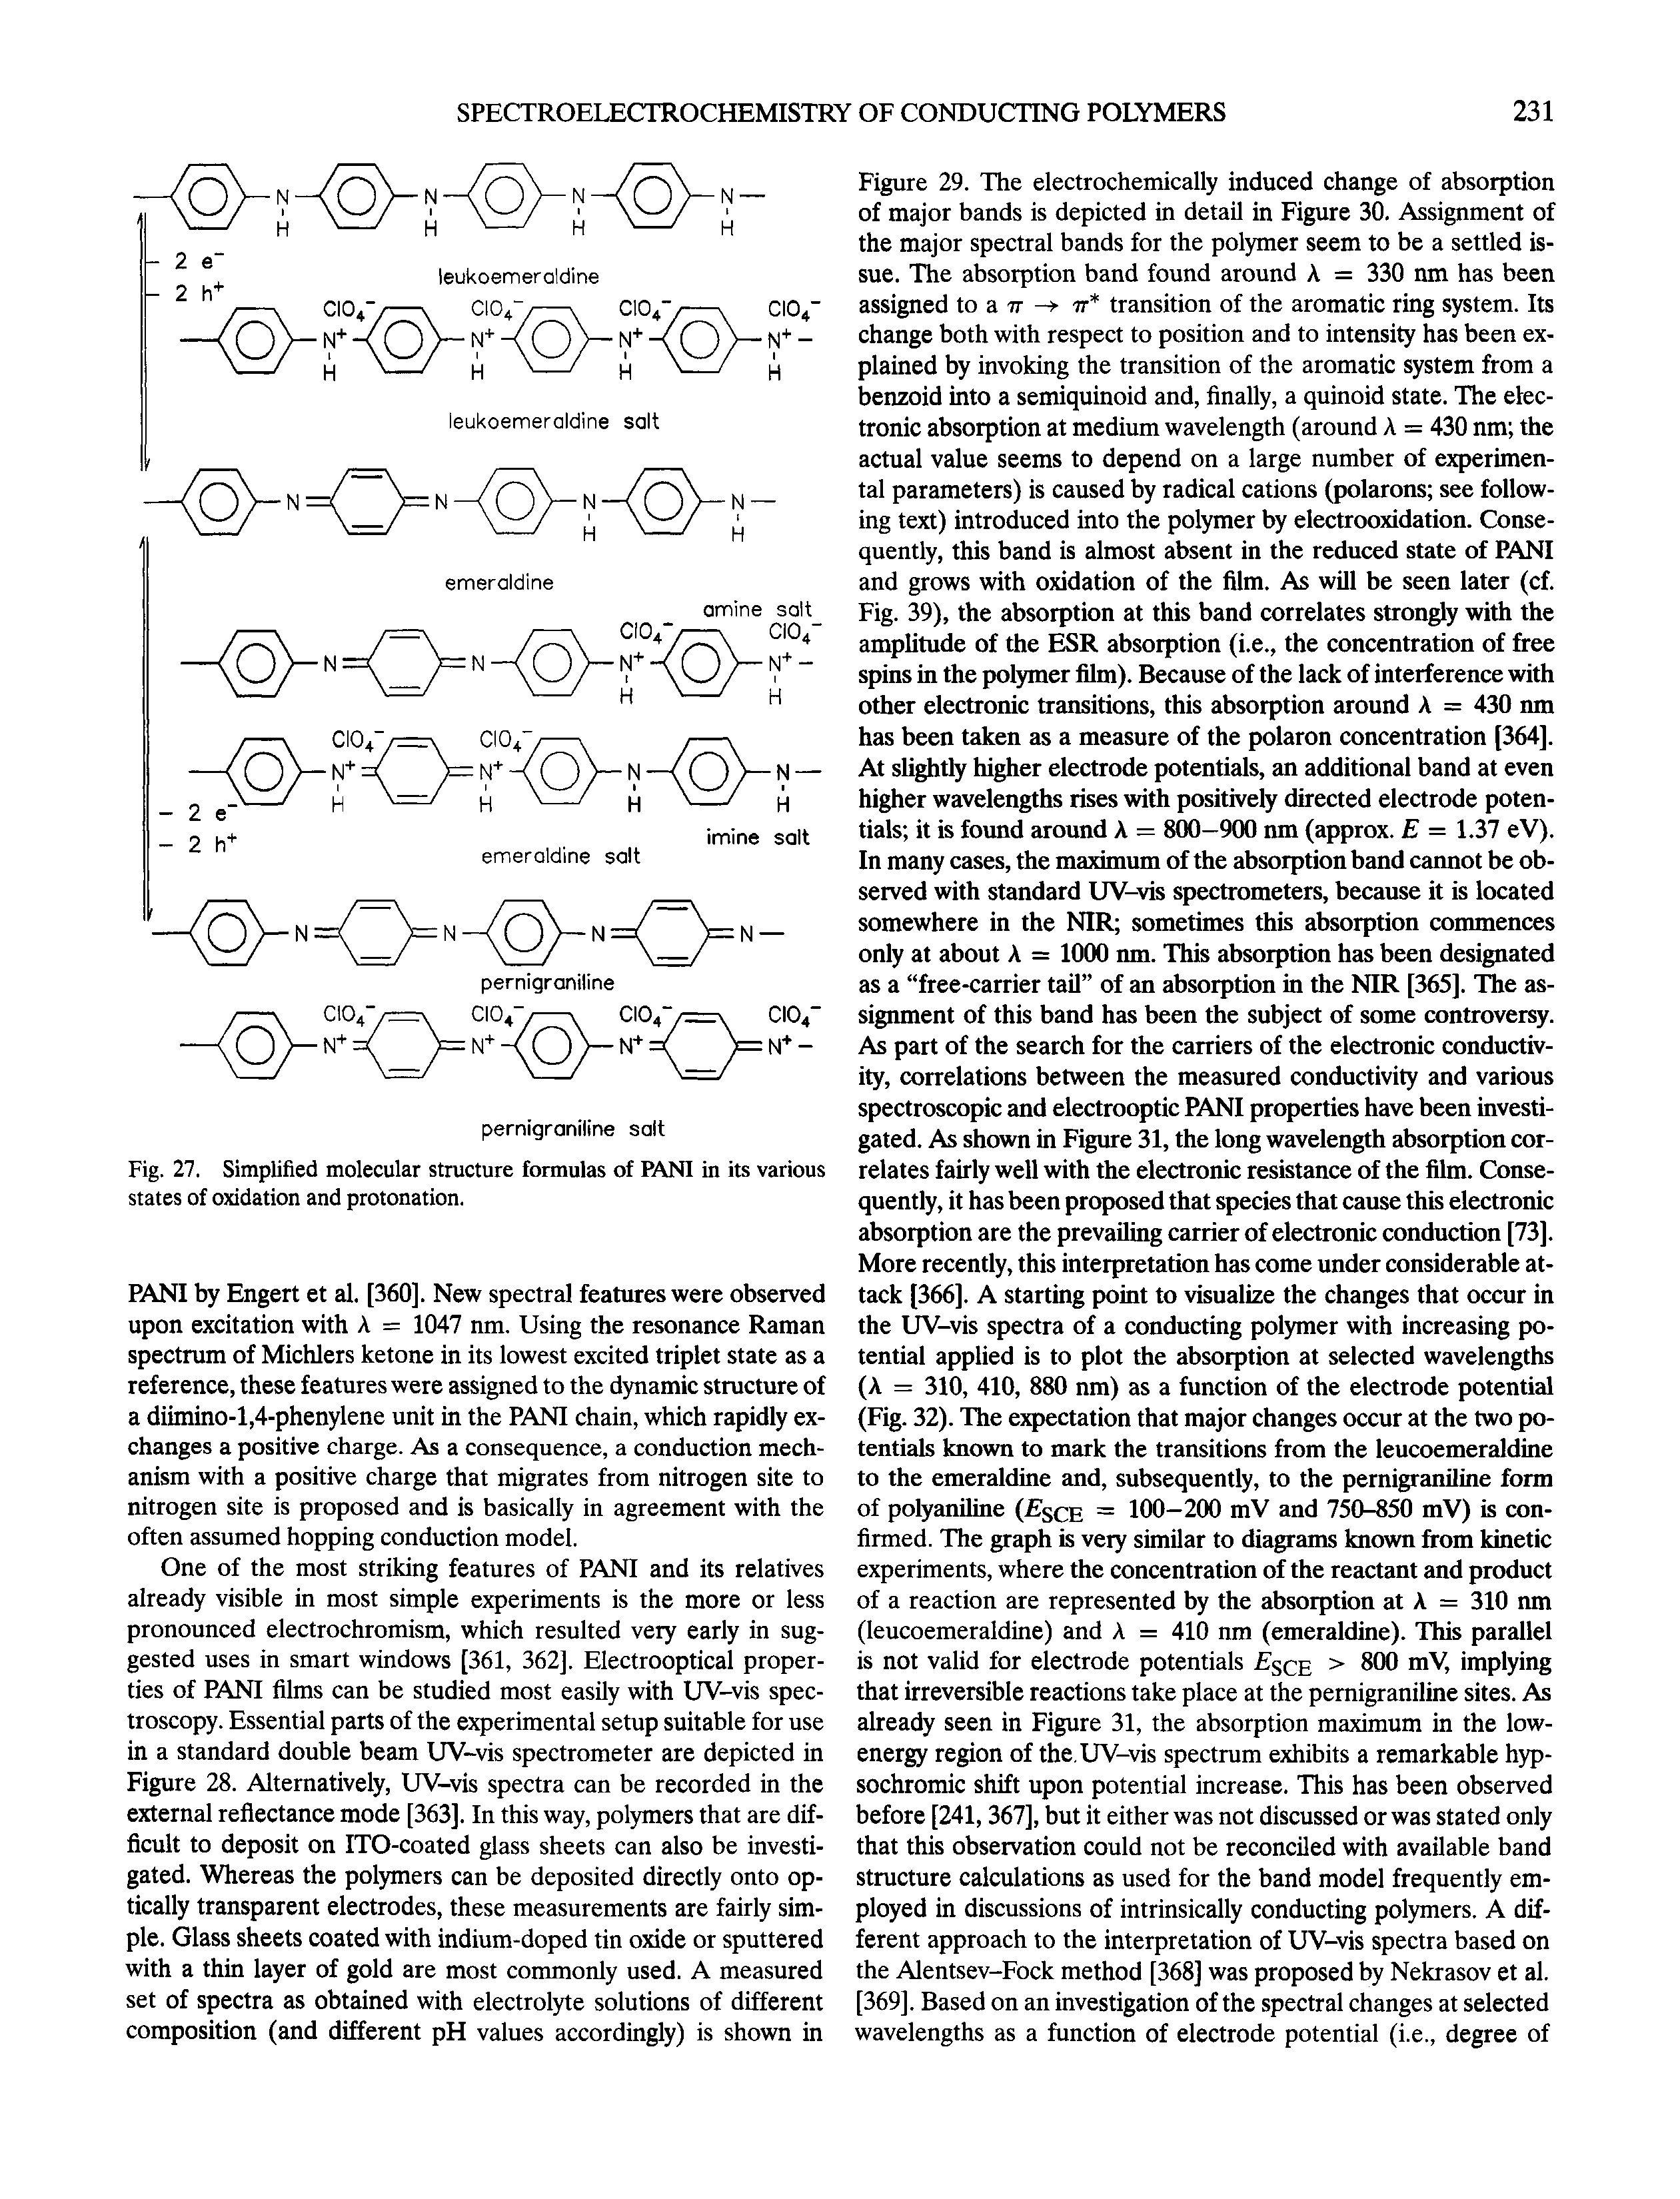 Fig. 27. Simplified molecular structure formulas of PANI in its various states of oxidation and protonation.